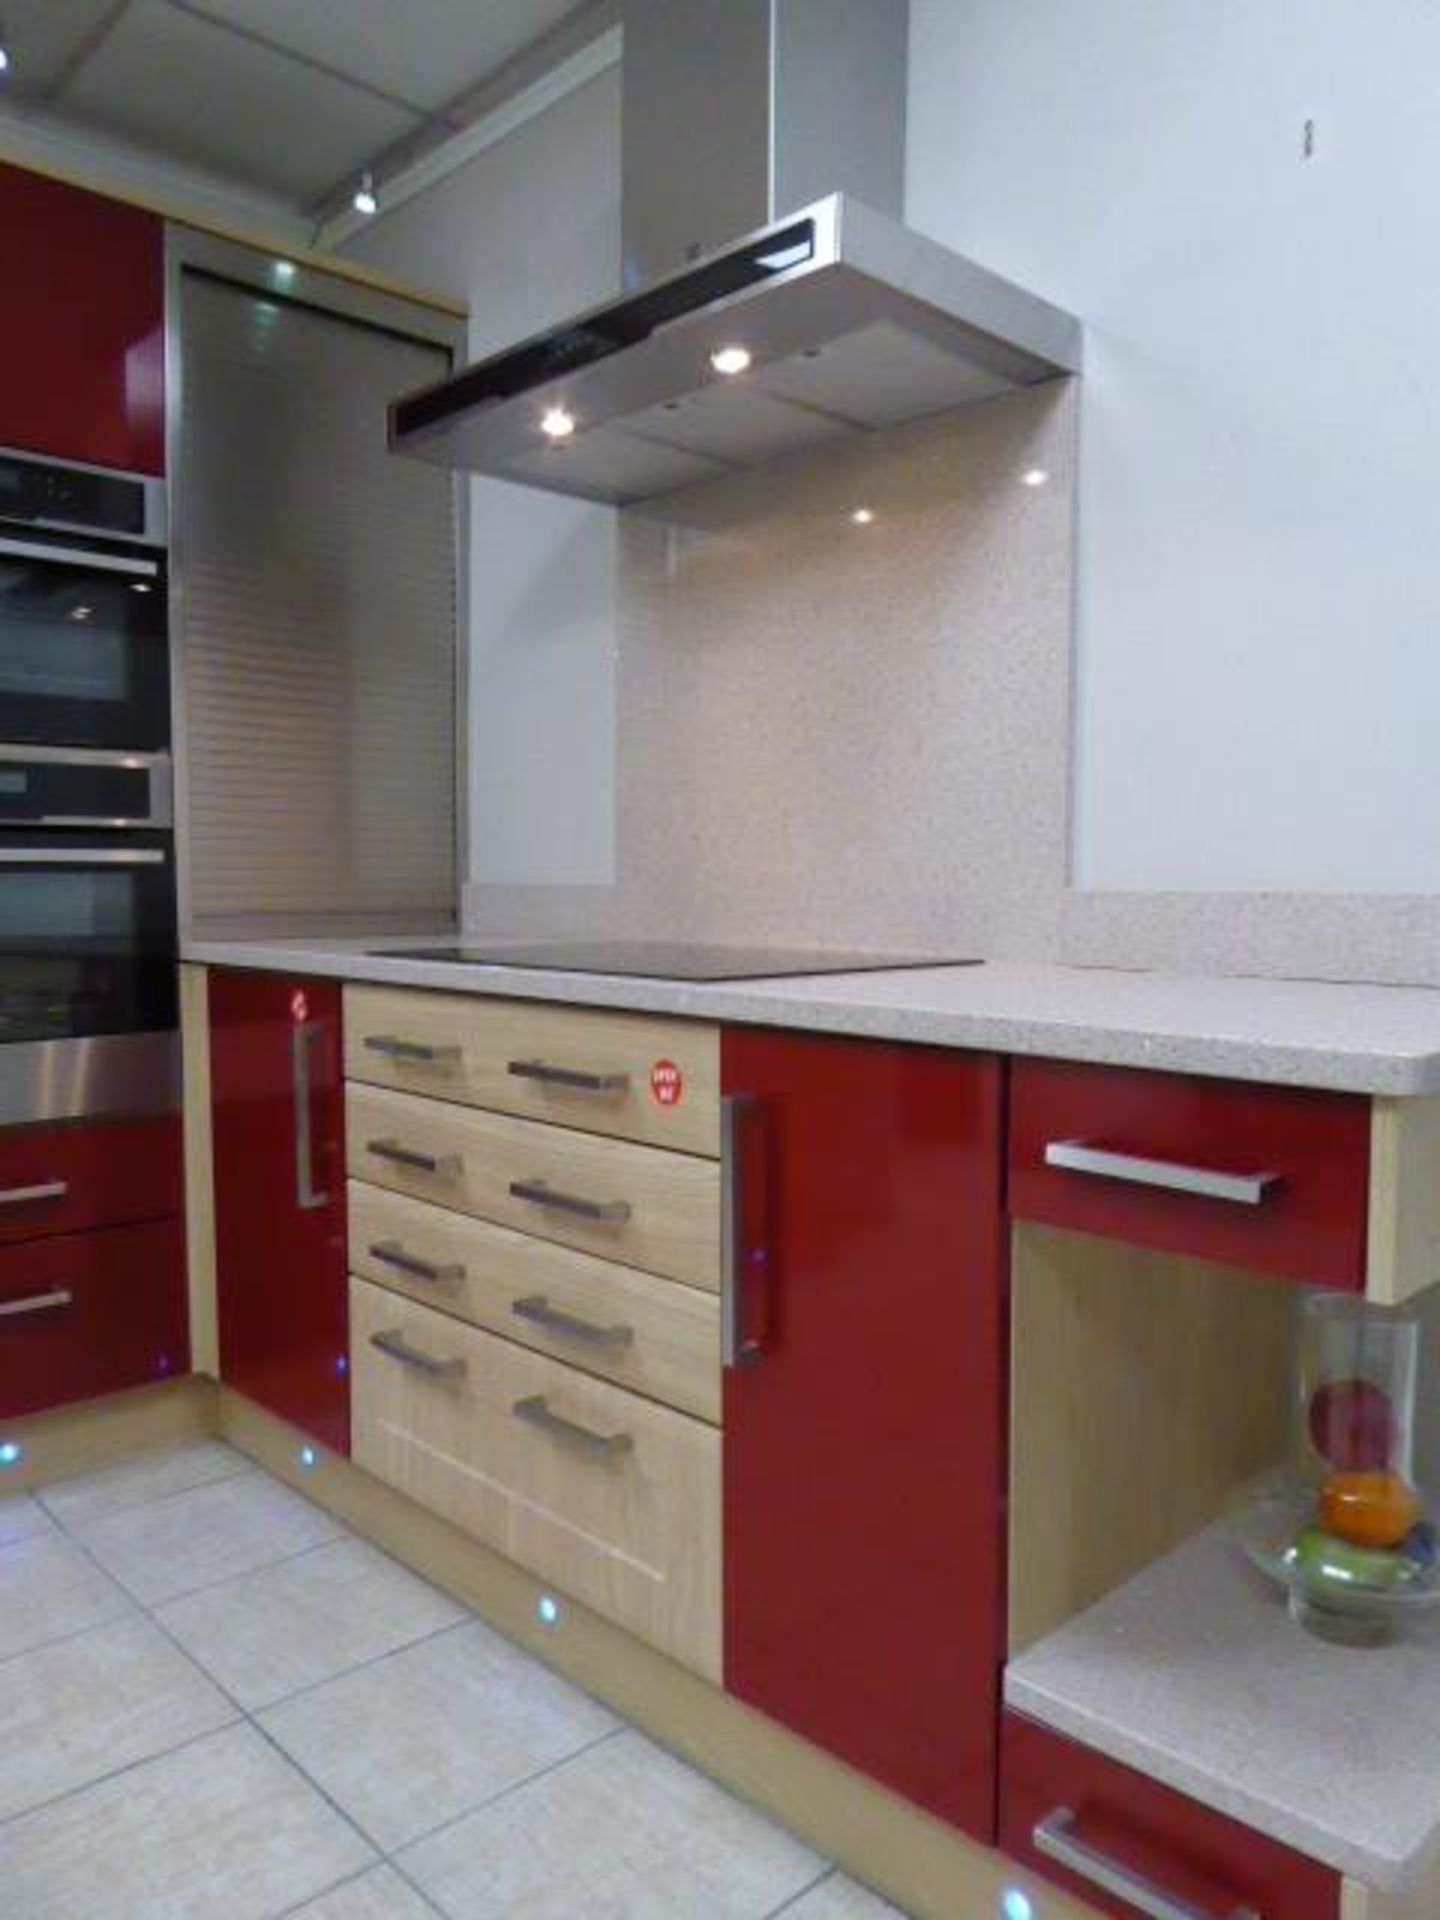 Alto gloss red China and York Shaker Corsico chestnut L-shape kitchen with quartz worktops. Max - Image 3 of 11